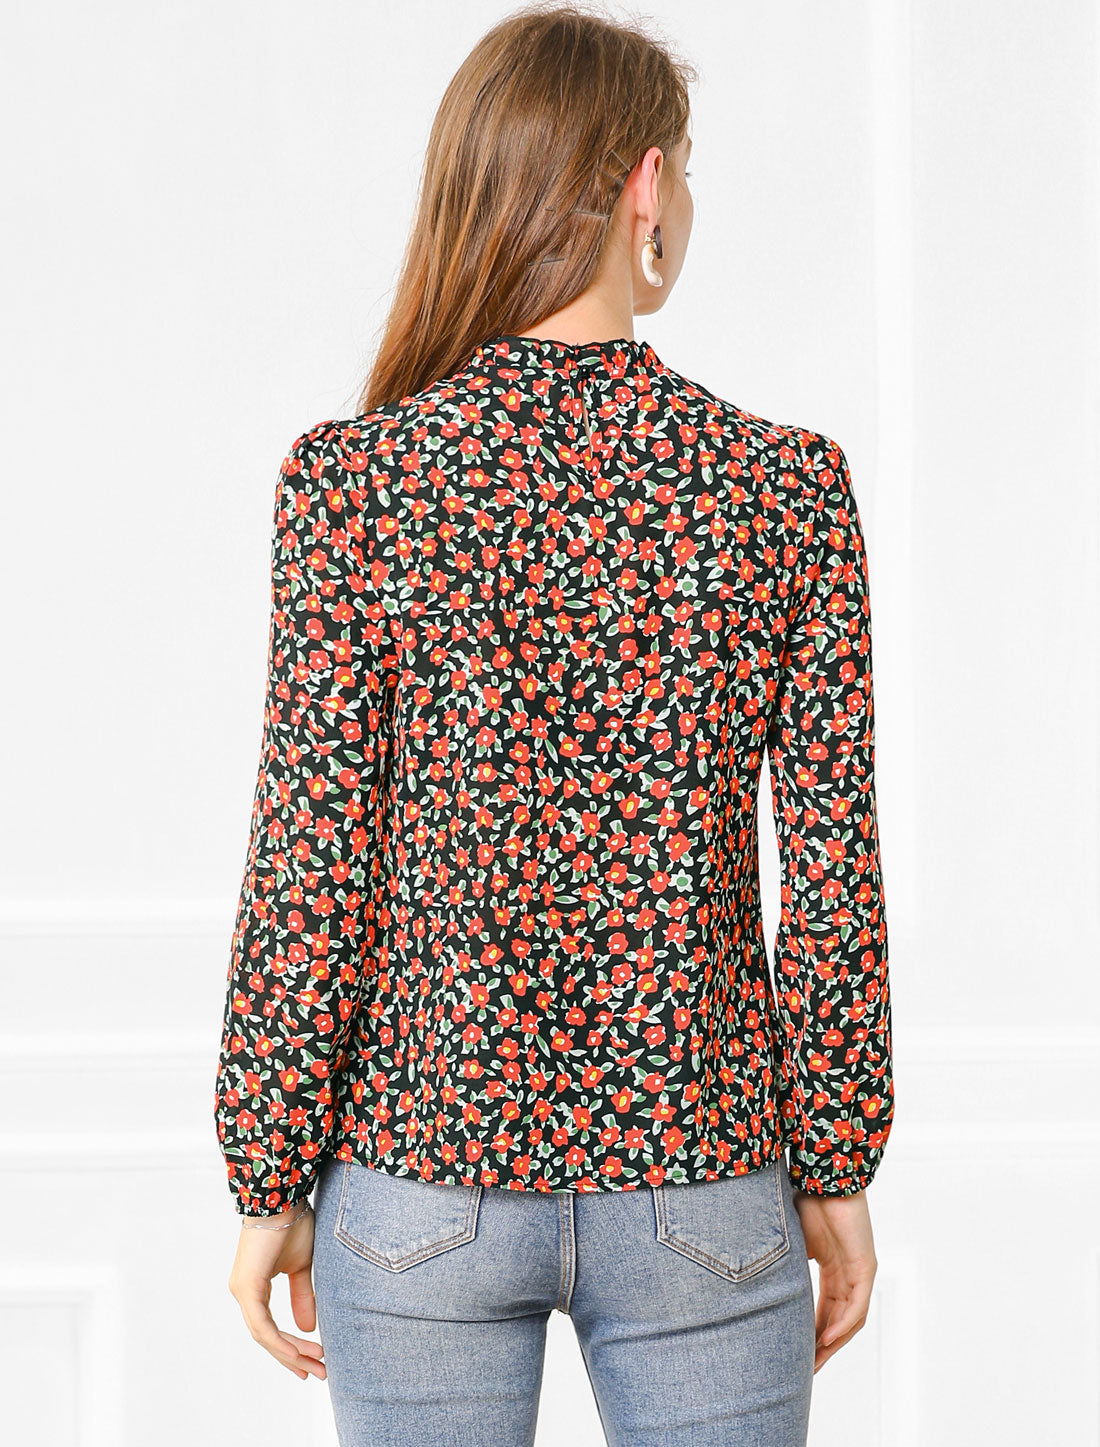 Allegra K Casual Stand Collared Blouse Long Sleeve Floral Tops